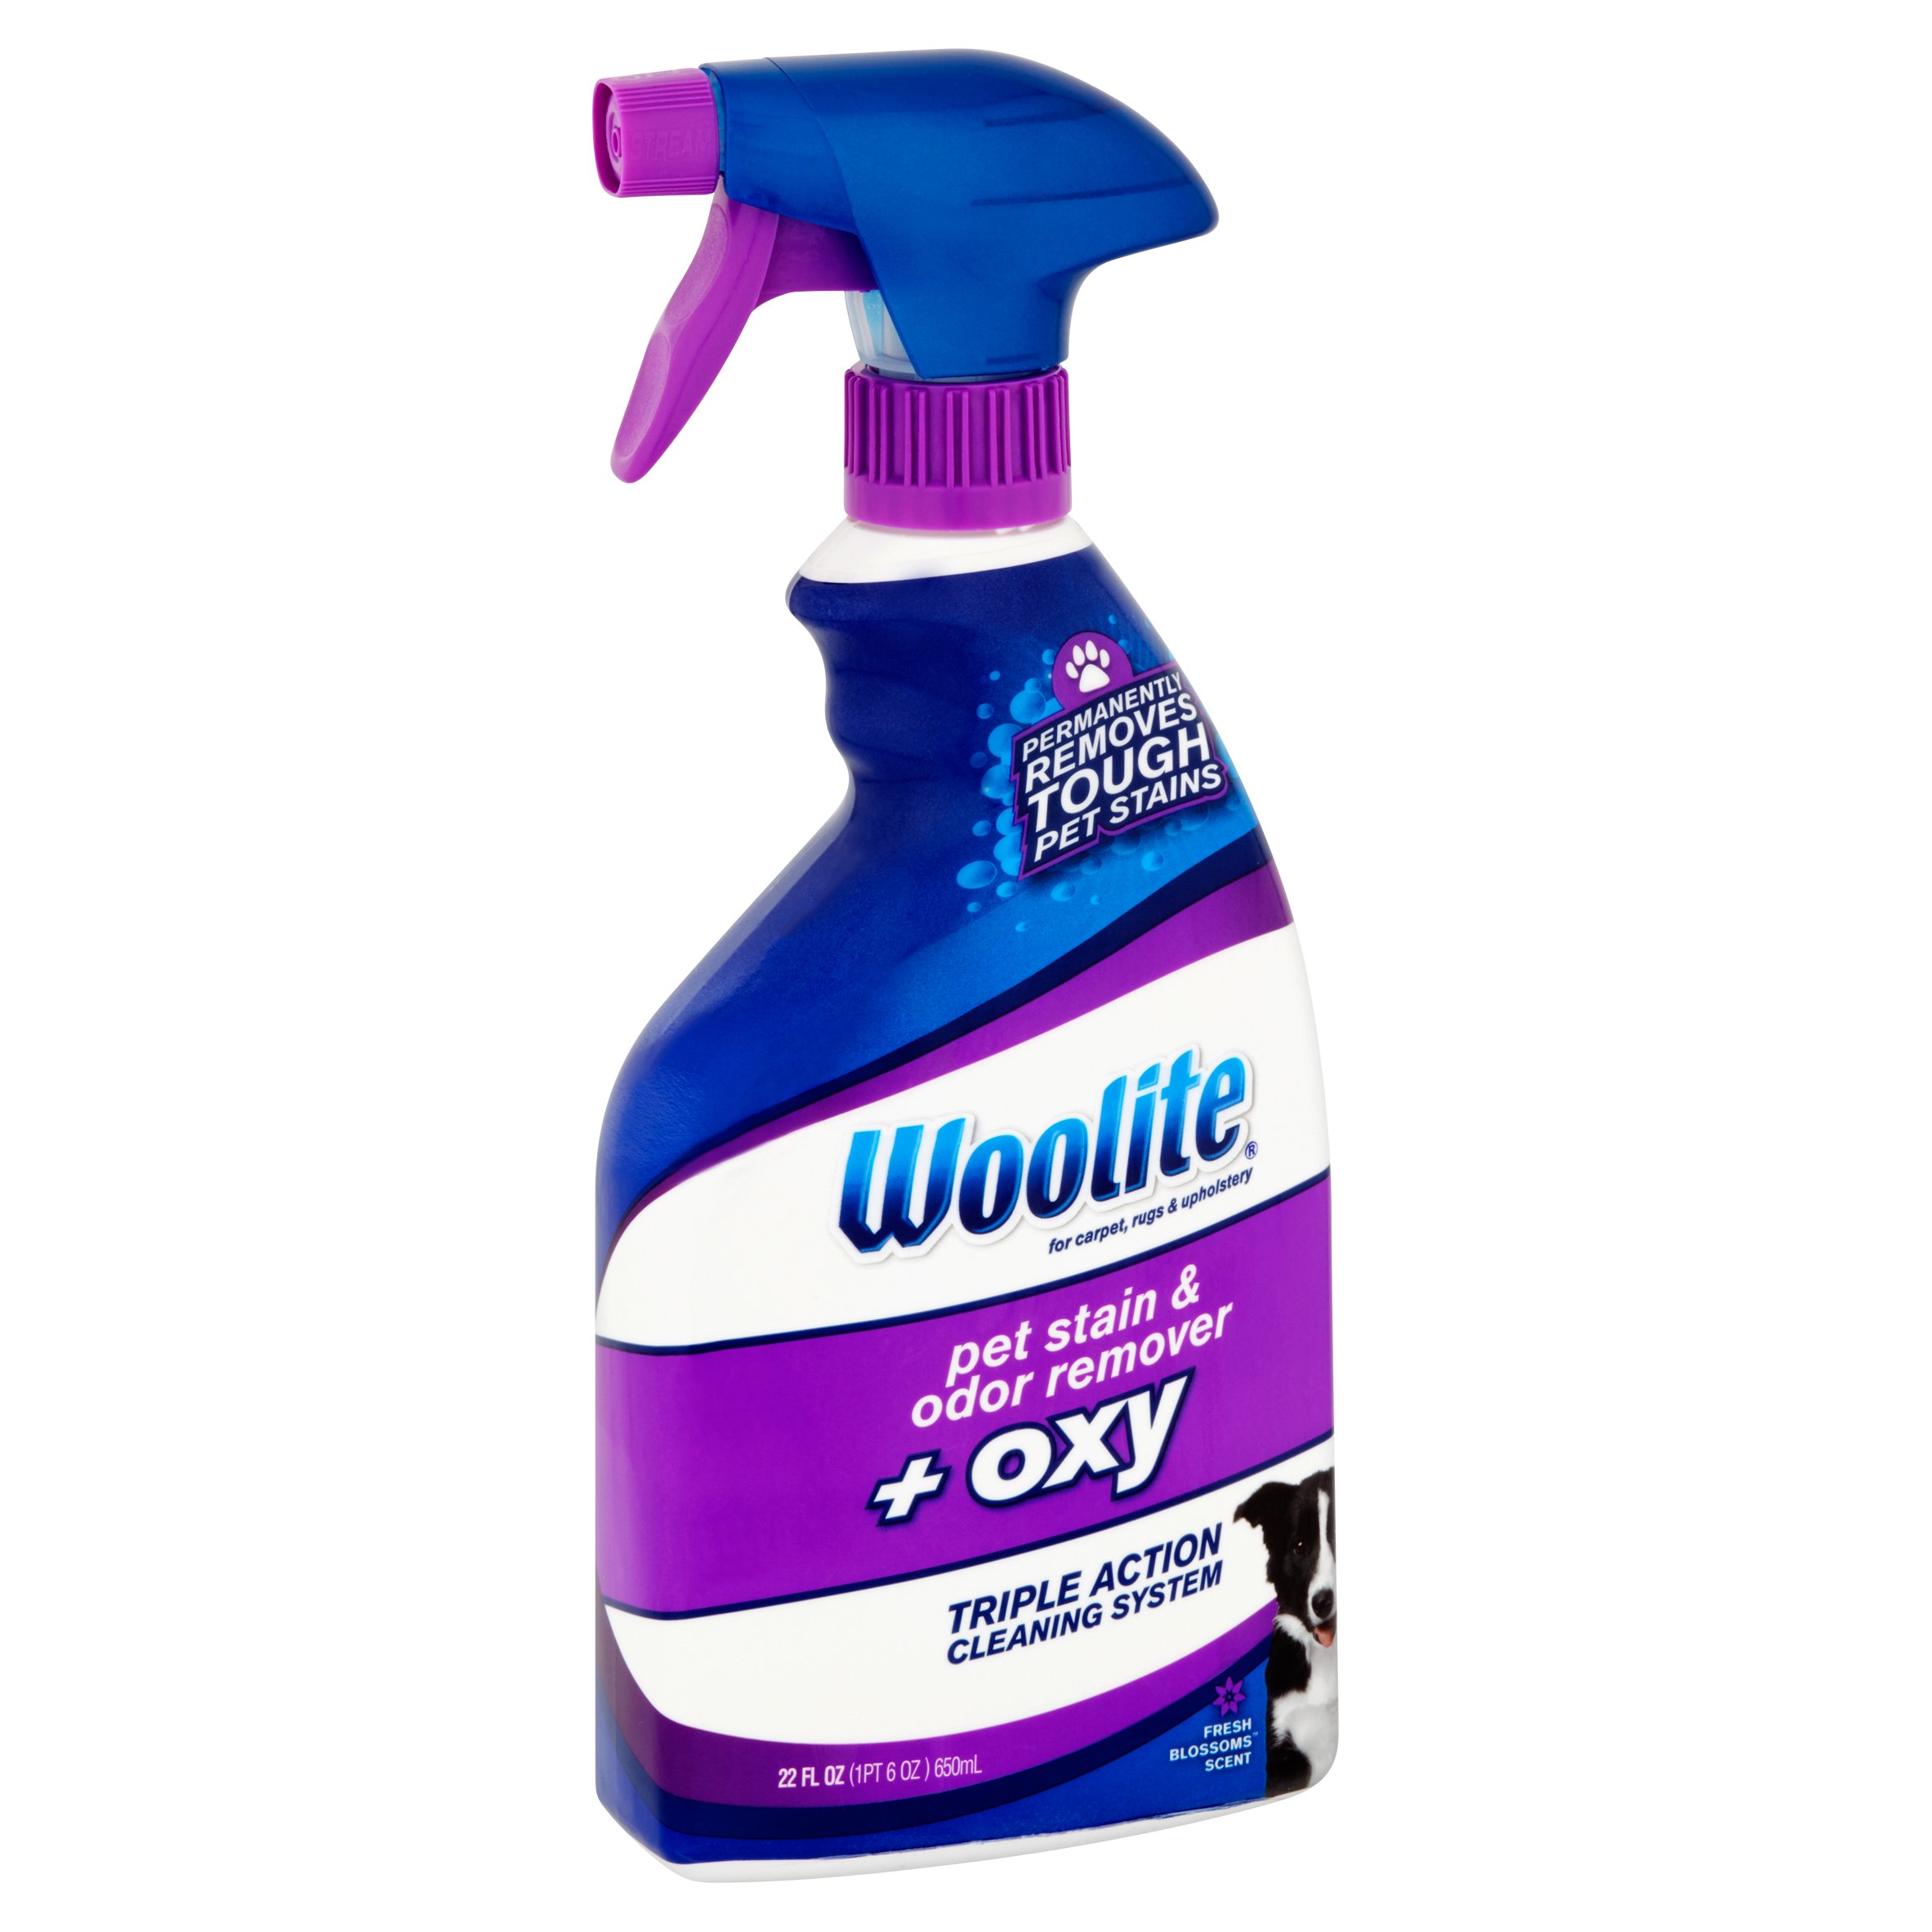 Woolite Fresh Blossoms Scent Pet Stain & Odor Remover + Oxy, 22 fl oz - image 2 of 5